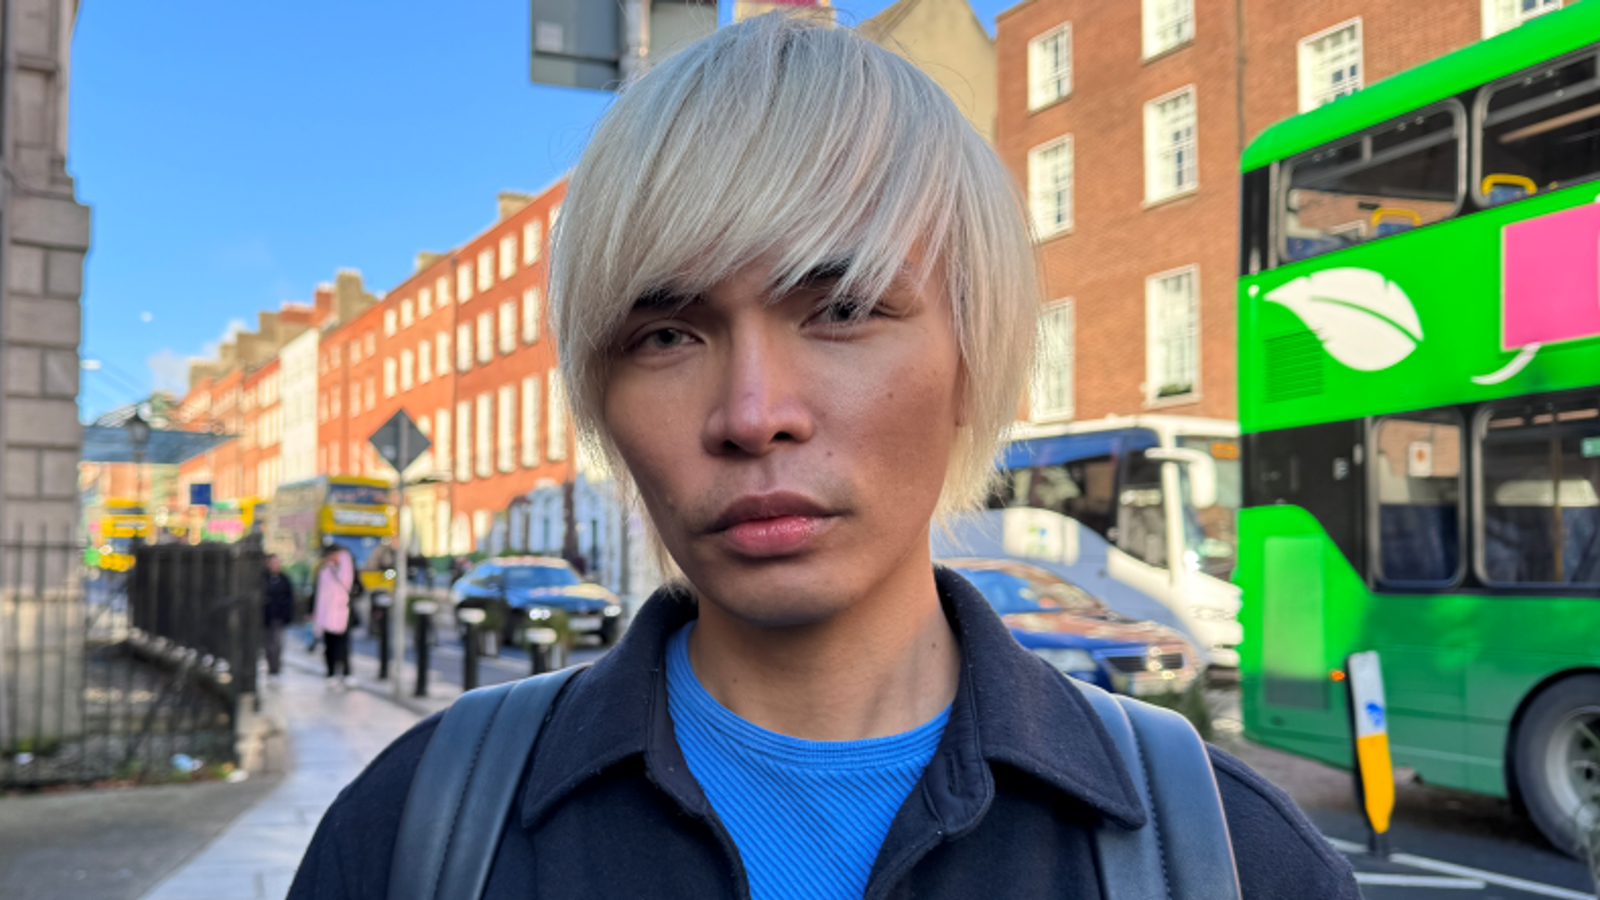 Dublin stabbing: 'It was like slow motion,' says Filipino nurse who provided first aid to victim